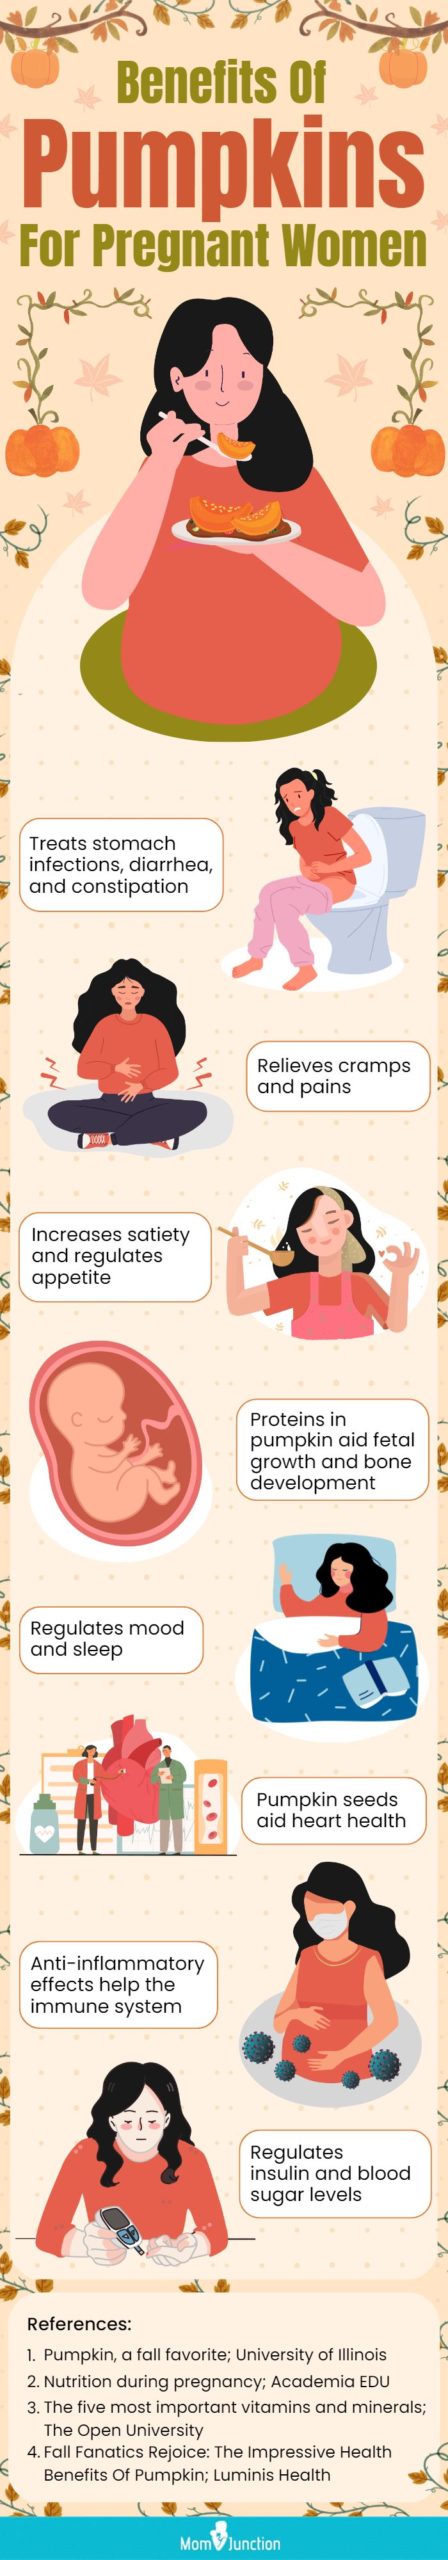 benefits of pumpkins for pregnant women (infographic)